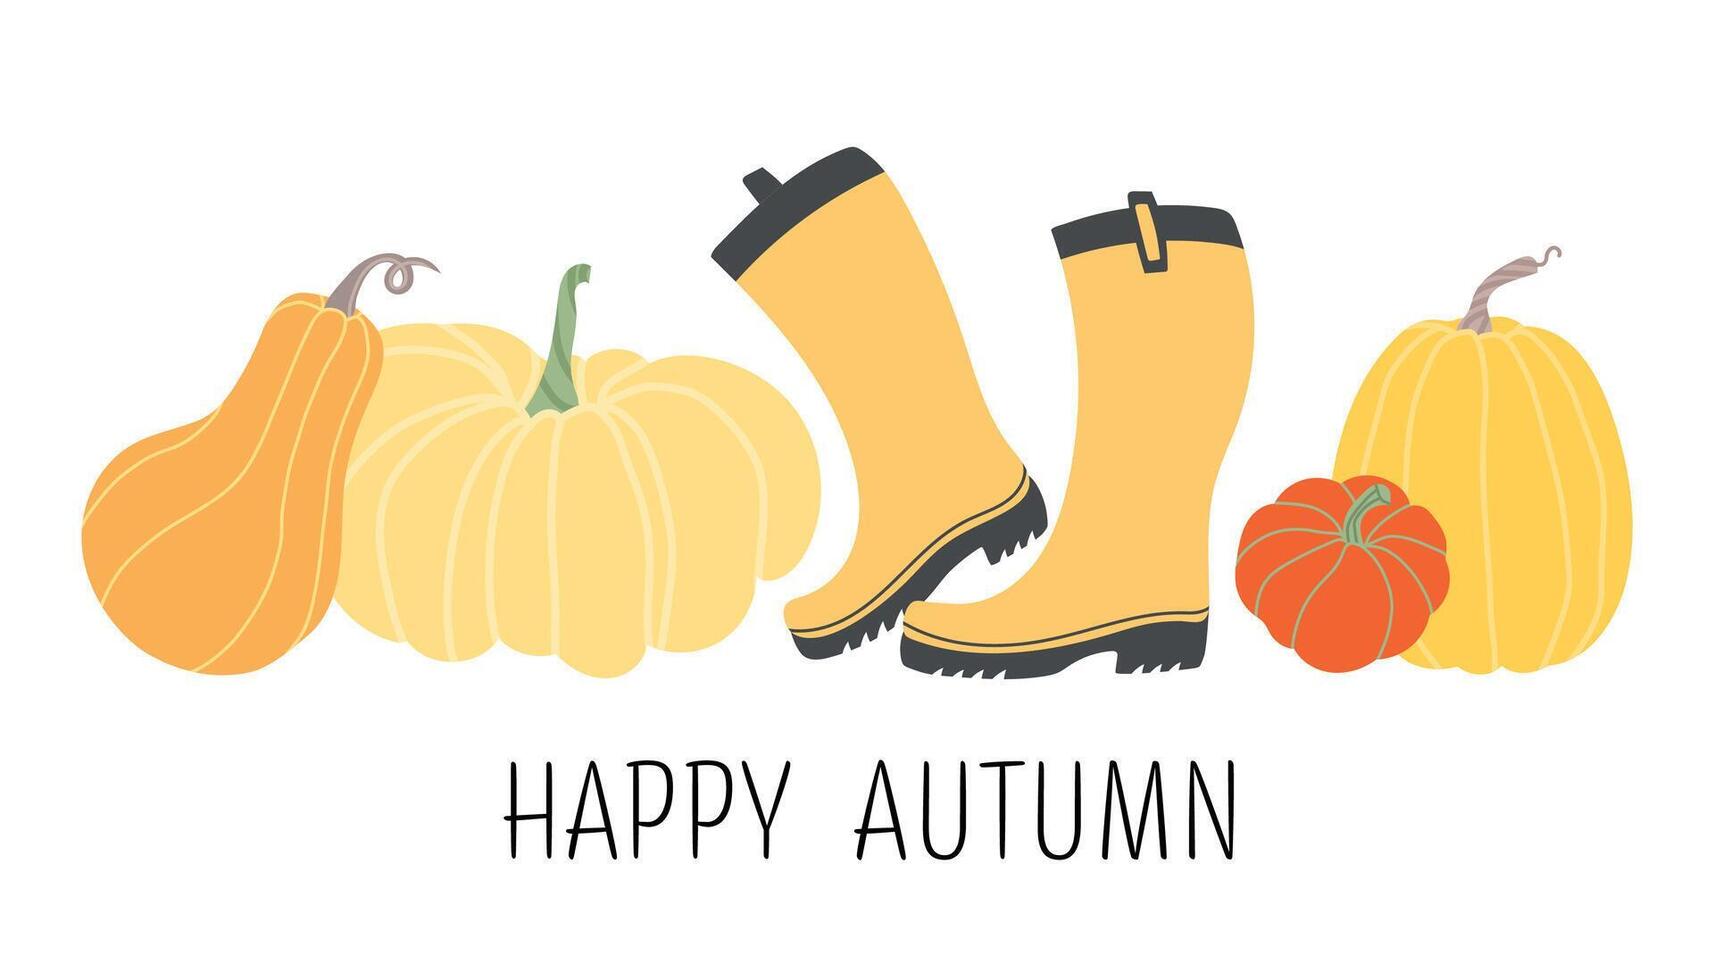 Happy autumn card. Cute hand drawn pumpkins and rubber boots on white background. Horizontal autumn banner in flat style. Vector harvest, autumn design for poster, banner, badge, label, print, card.